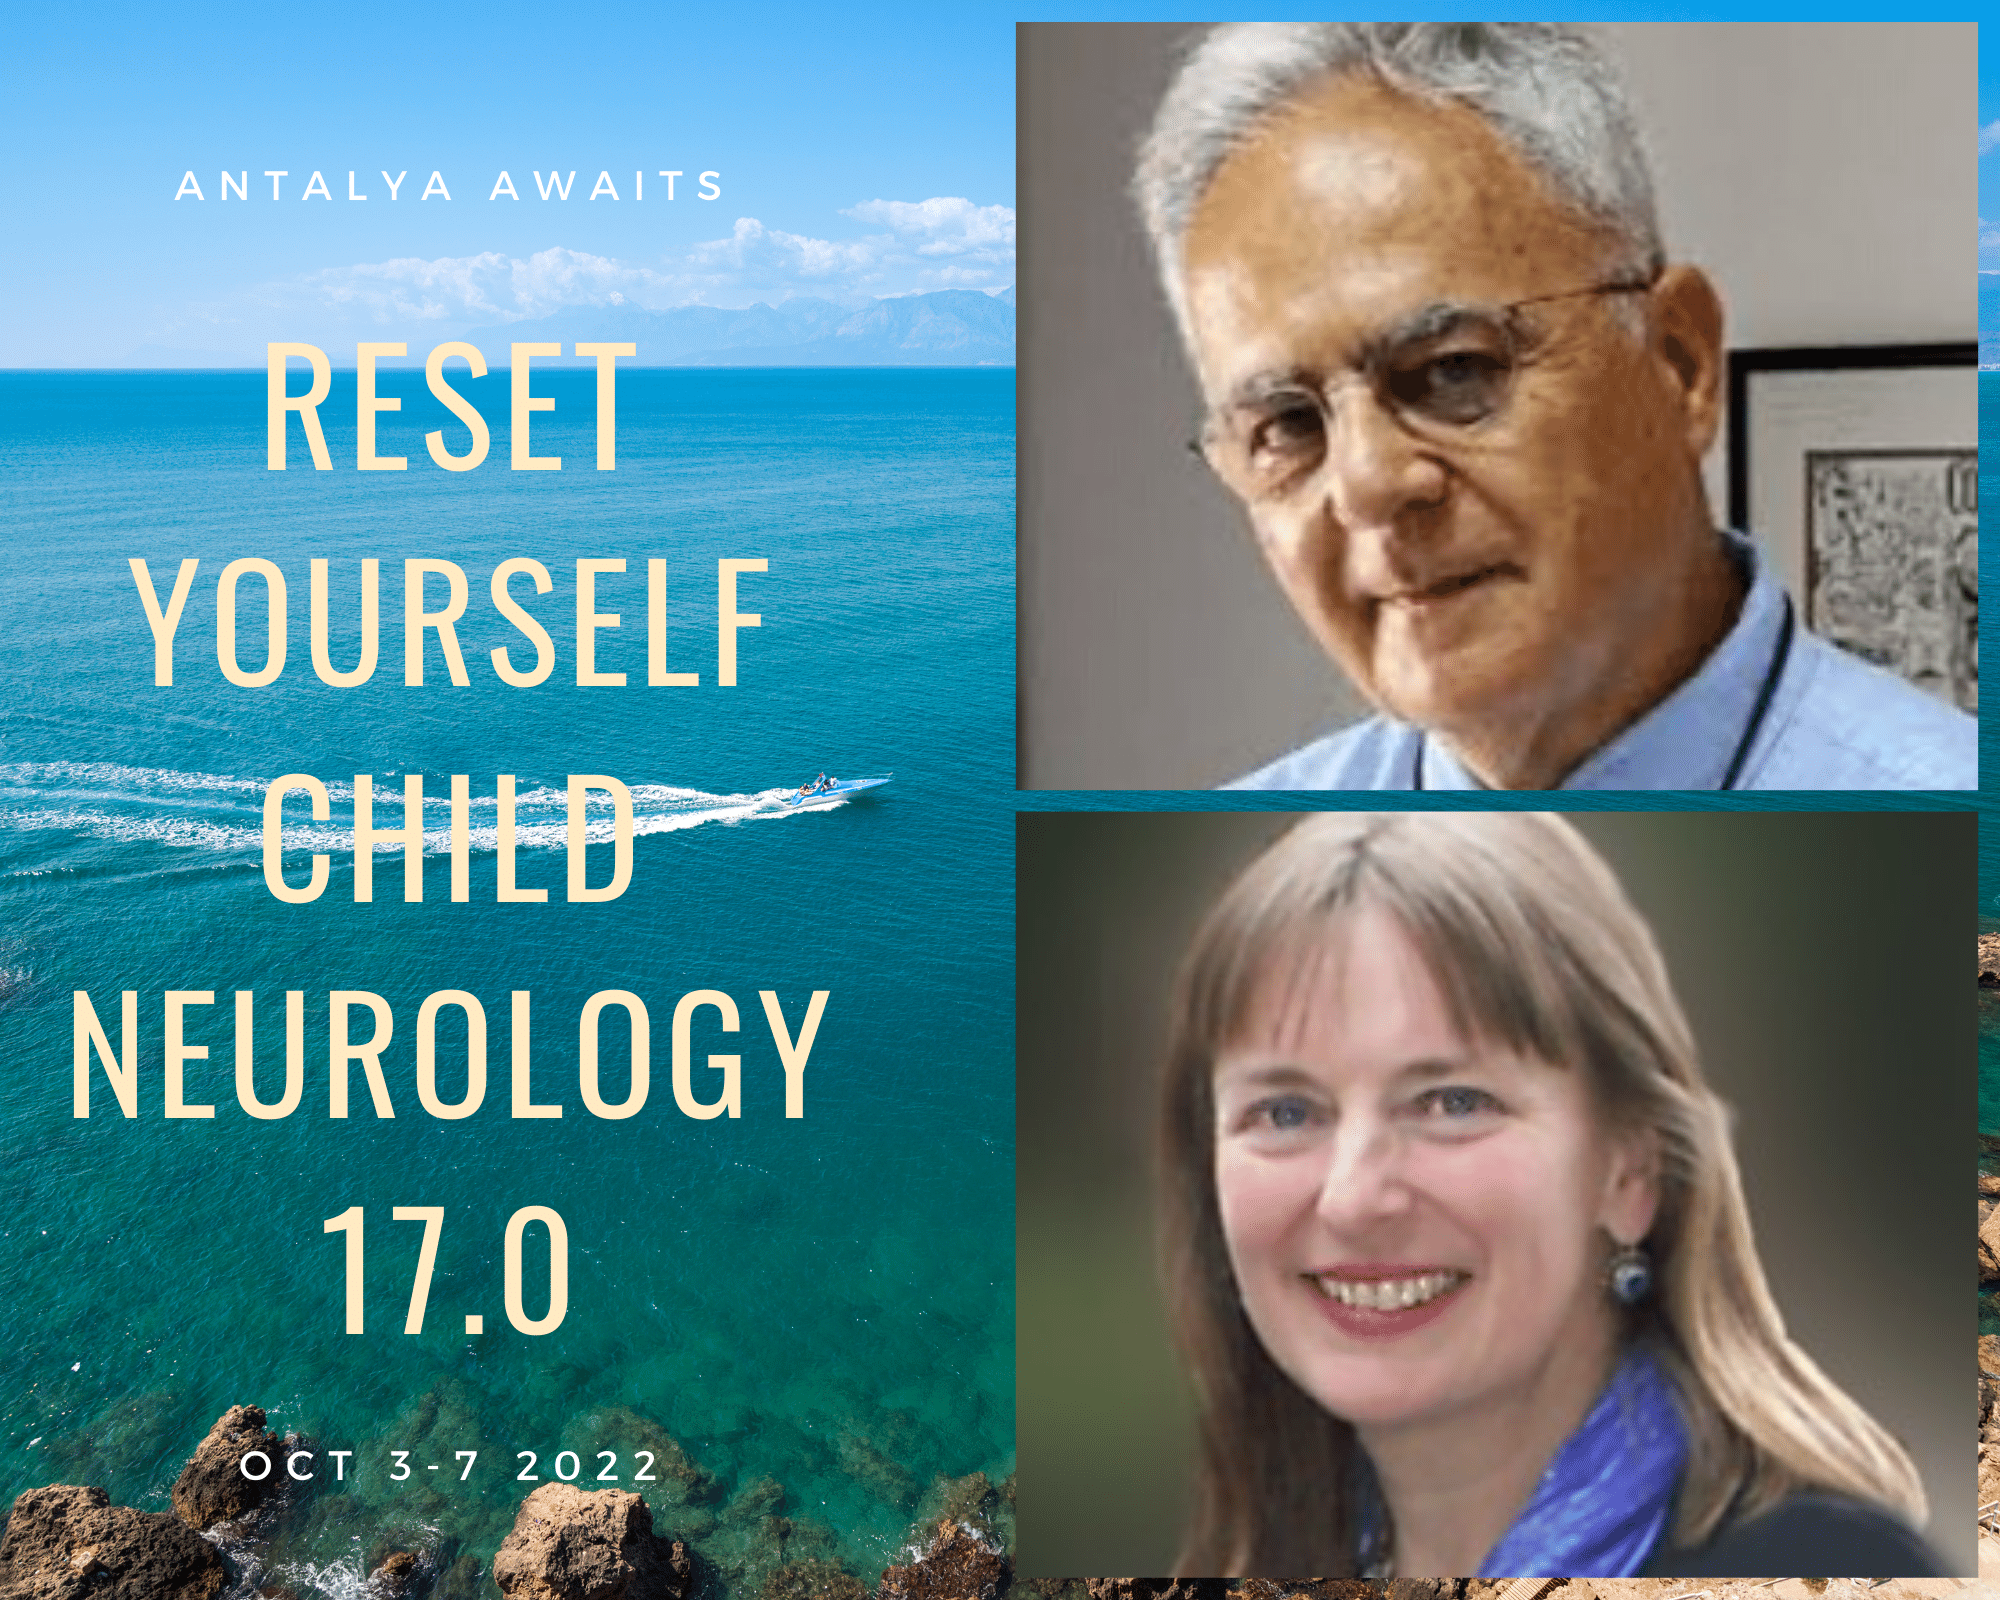 Reset Yourself Child Neurology 17.0 at the ICNC2022